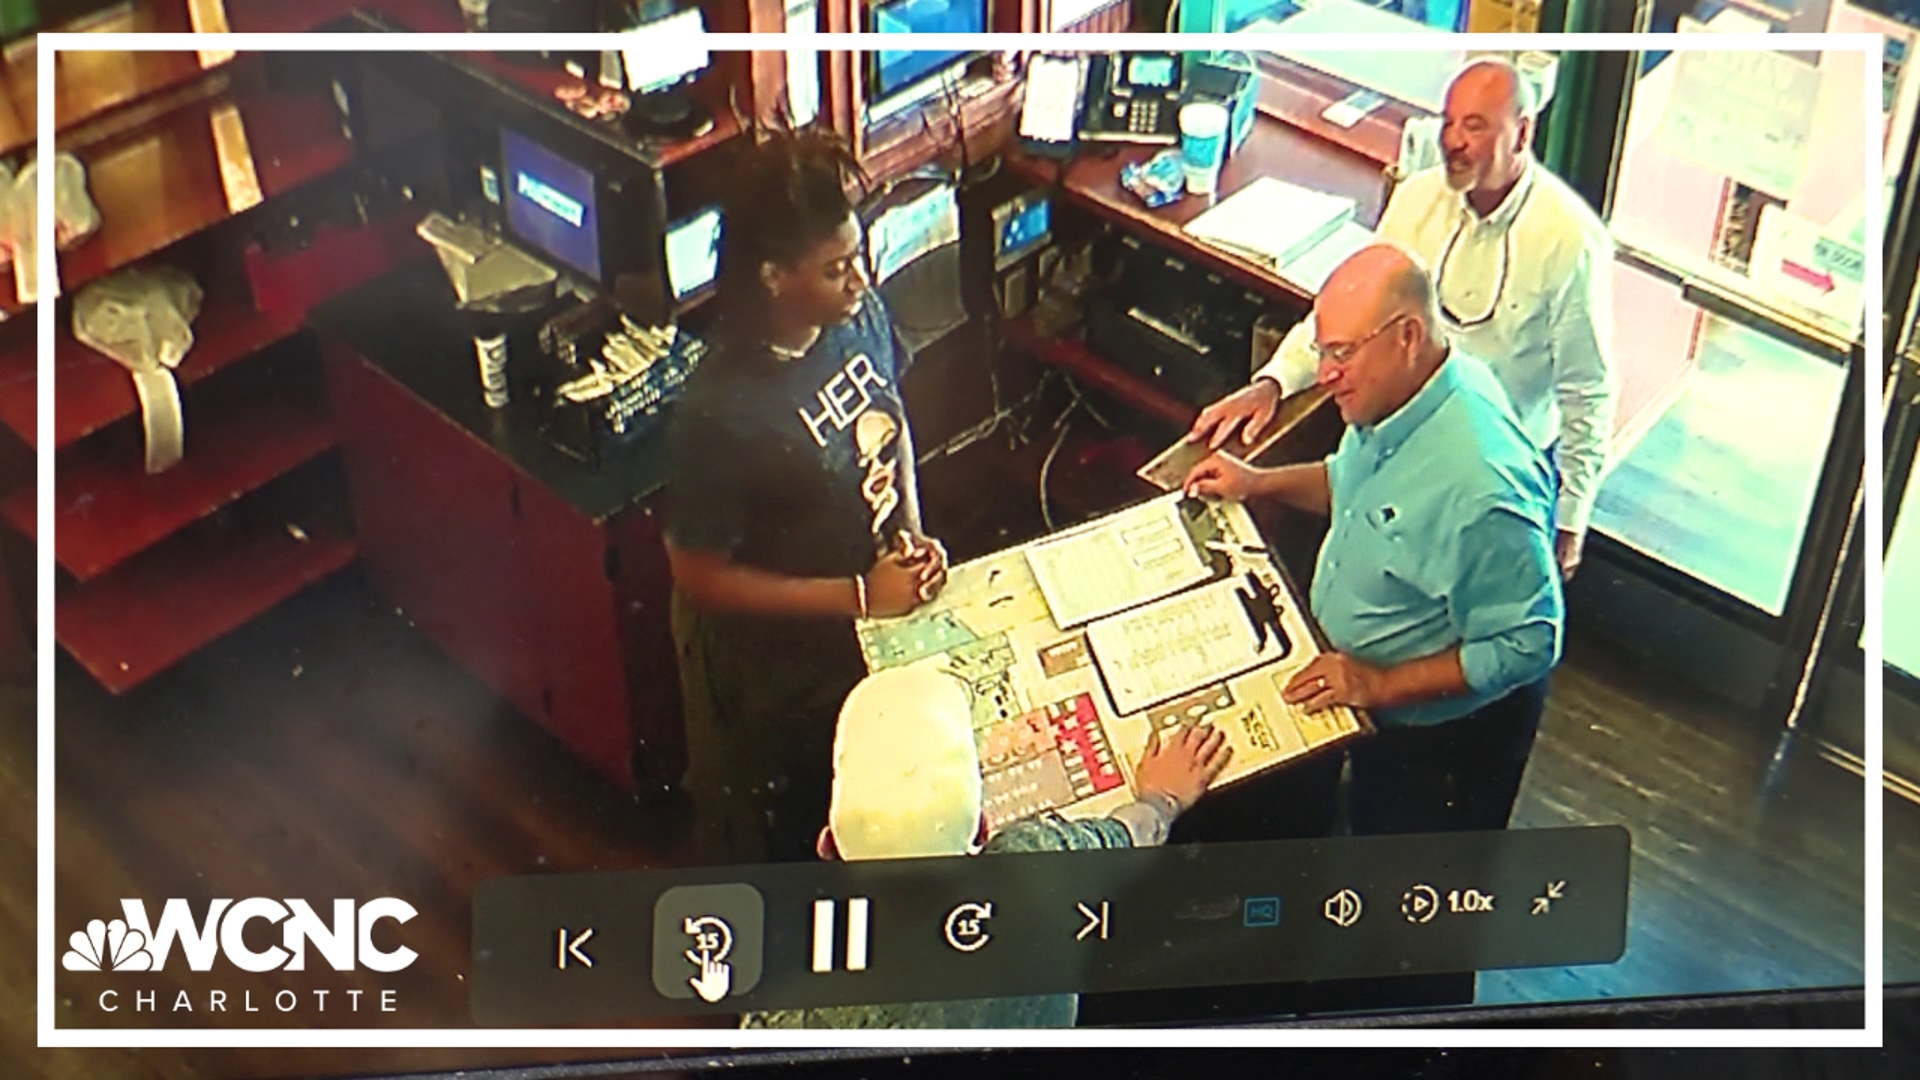 Dilworth Neighborhood Grille confirmed the appearance of the Carolina Panthers owner to WCNC Charlotte.